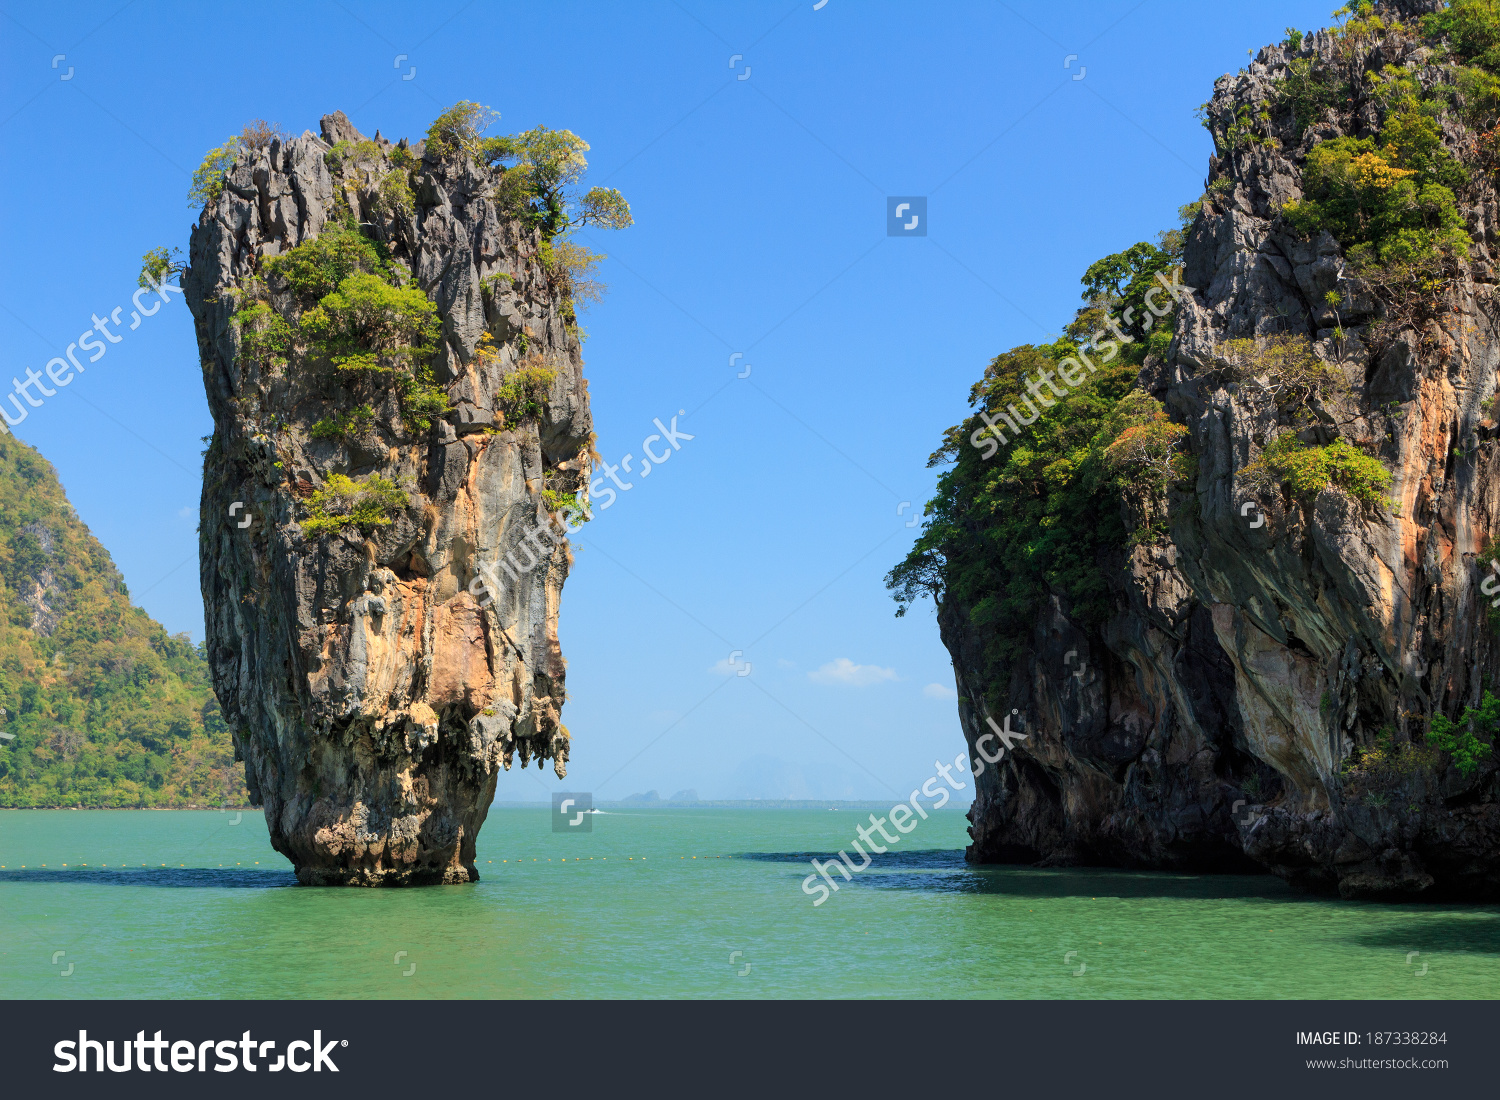 Khao Phing Kan clipart #1, Download drawings